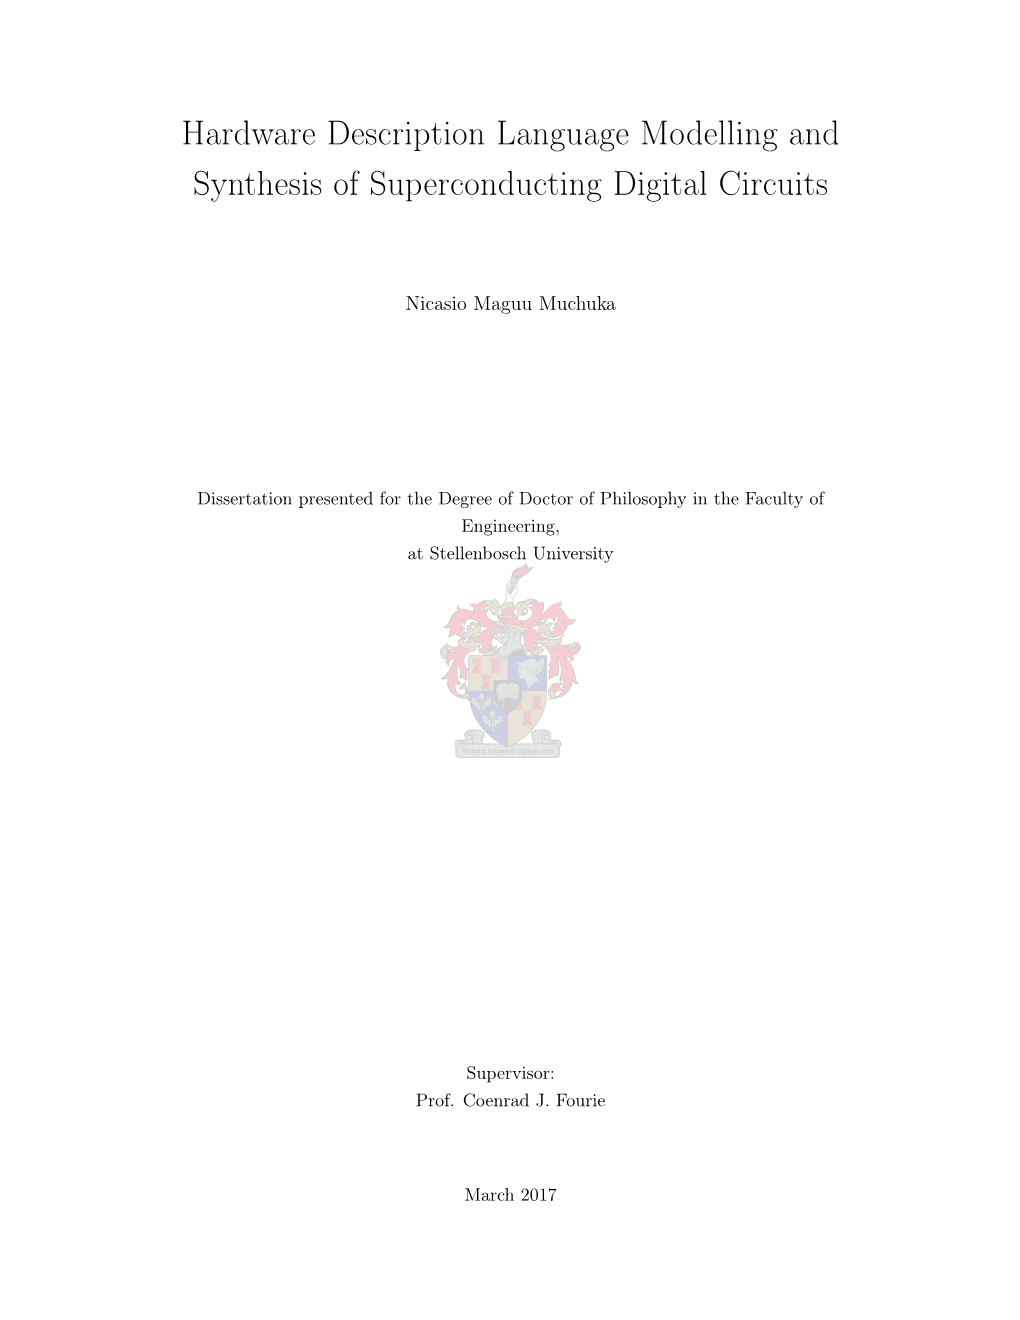 Hardware Description Language Modelling and Synthesis of Superconducting Digital Circuits